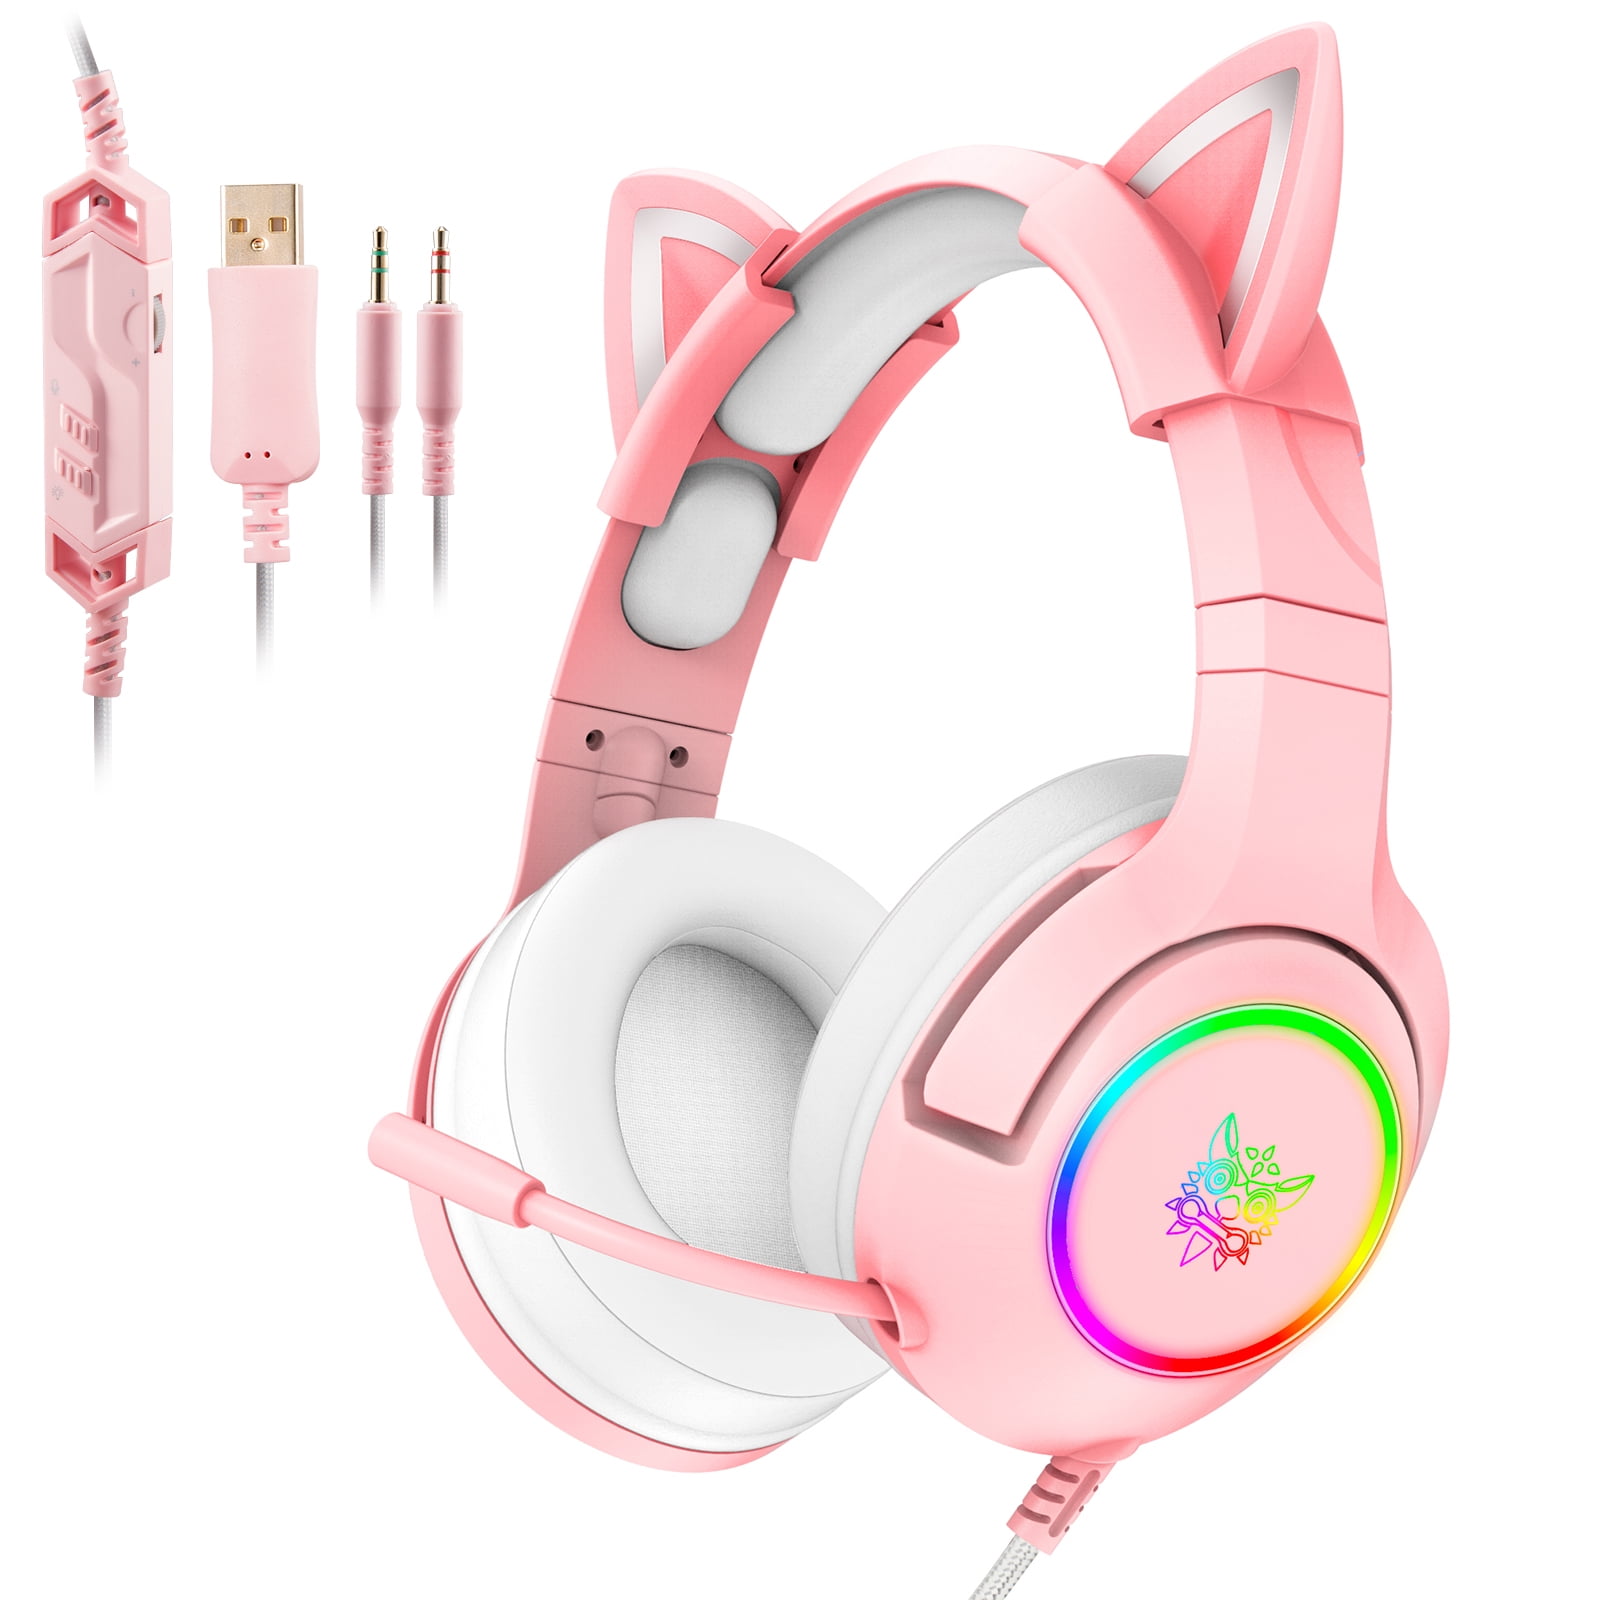 ONIKUMA Wired Pink Gaming Headset with Removable Cat Ears for PS5, PS4, Xbox One (Adapter Not Included), Switch, PC, with Surround Sound, RGB LED Light & Noise Canceling Retractable Microphone - Walmart.com -